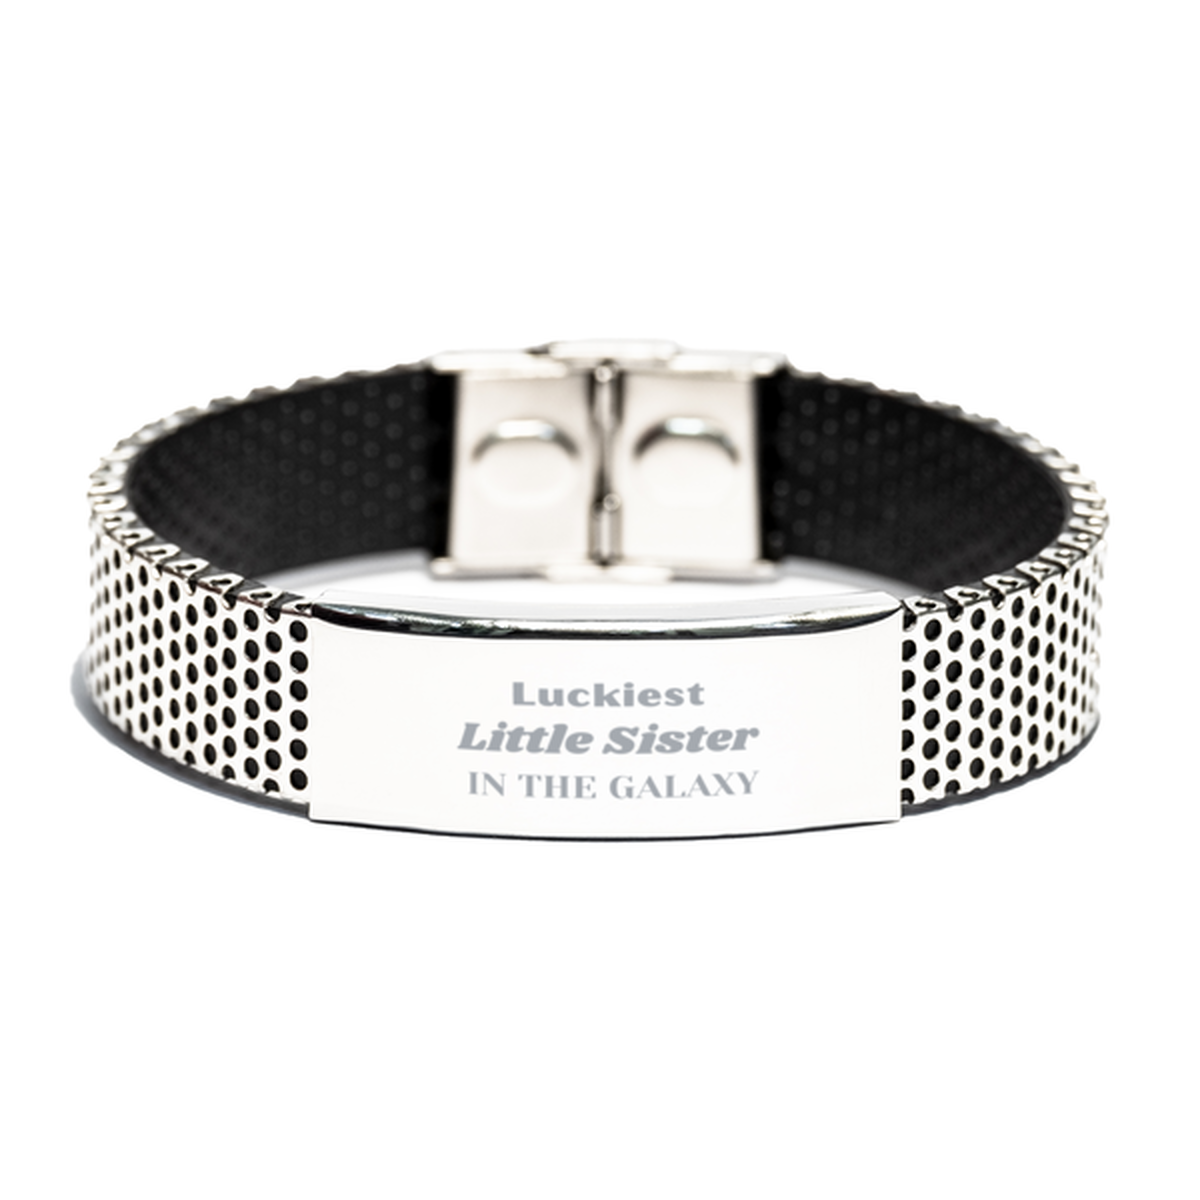 Luckiest Little Sister in the Galaxy, To My Little Sister Engraved Gifts, Christmas Little Sister Stainless Steel Bracelet Gifts, X-mas Birthday Unique Gifts For Little Sister Men Women